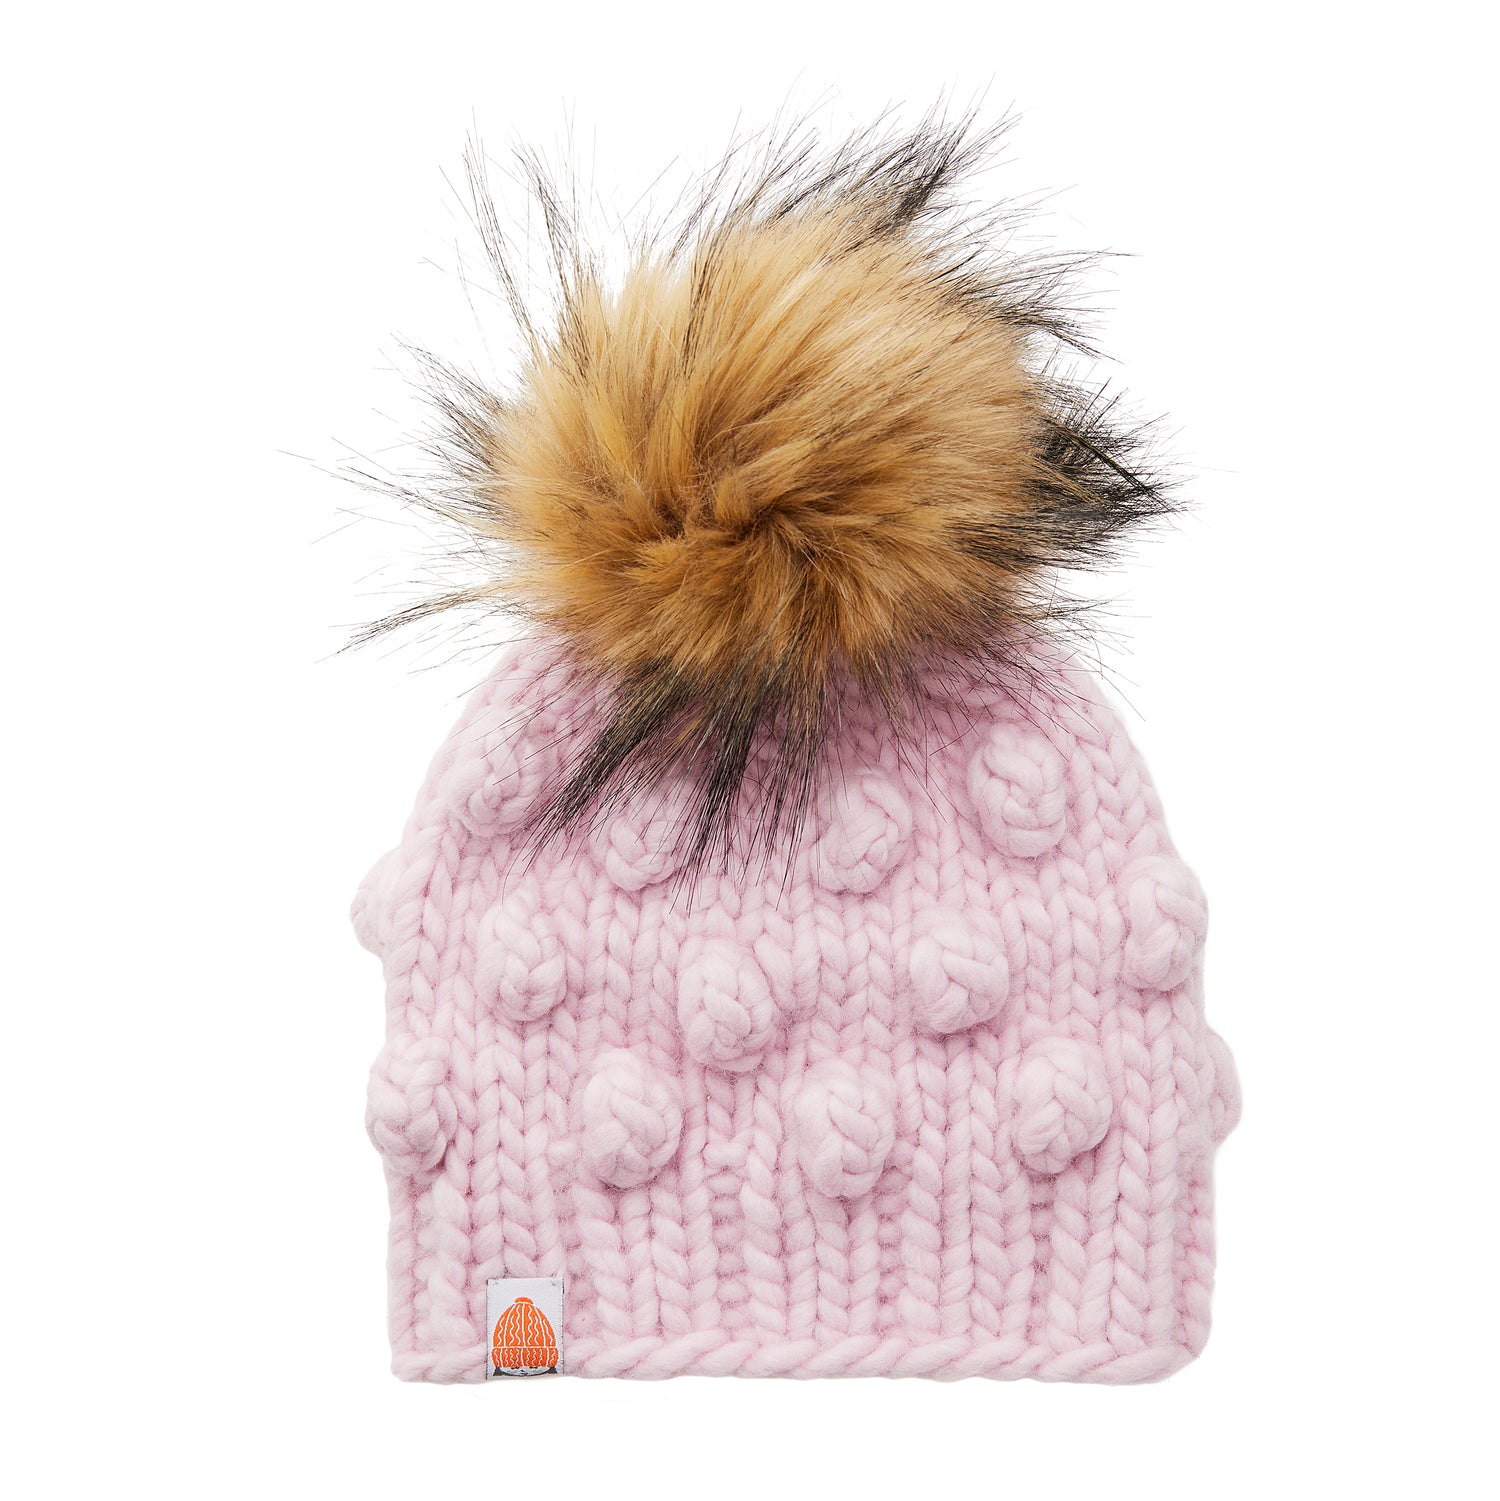 The Toddler Lil Campbell Beanie